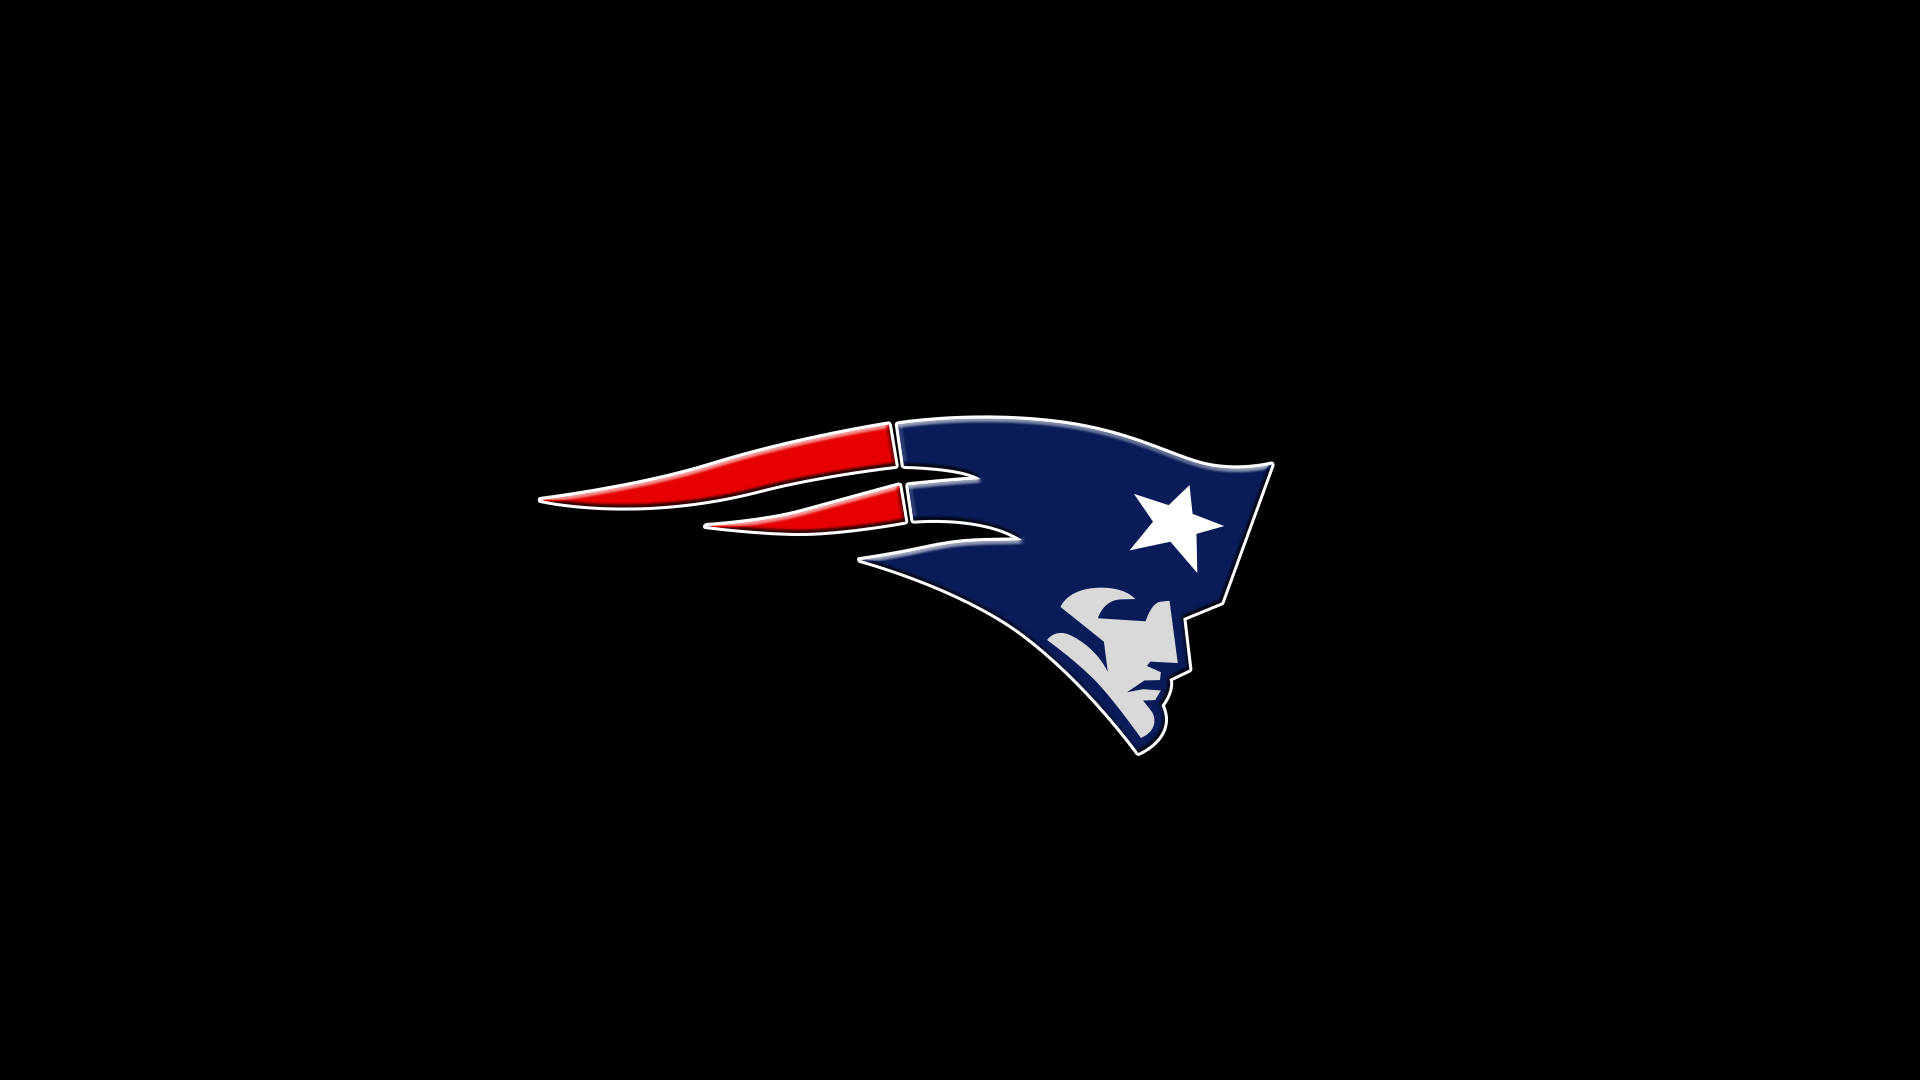 Download New England Patriots Dominating The NFL Wallpaper 